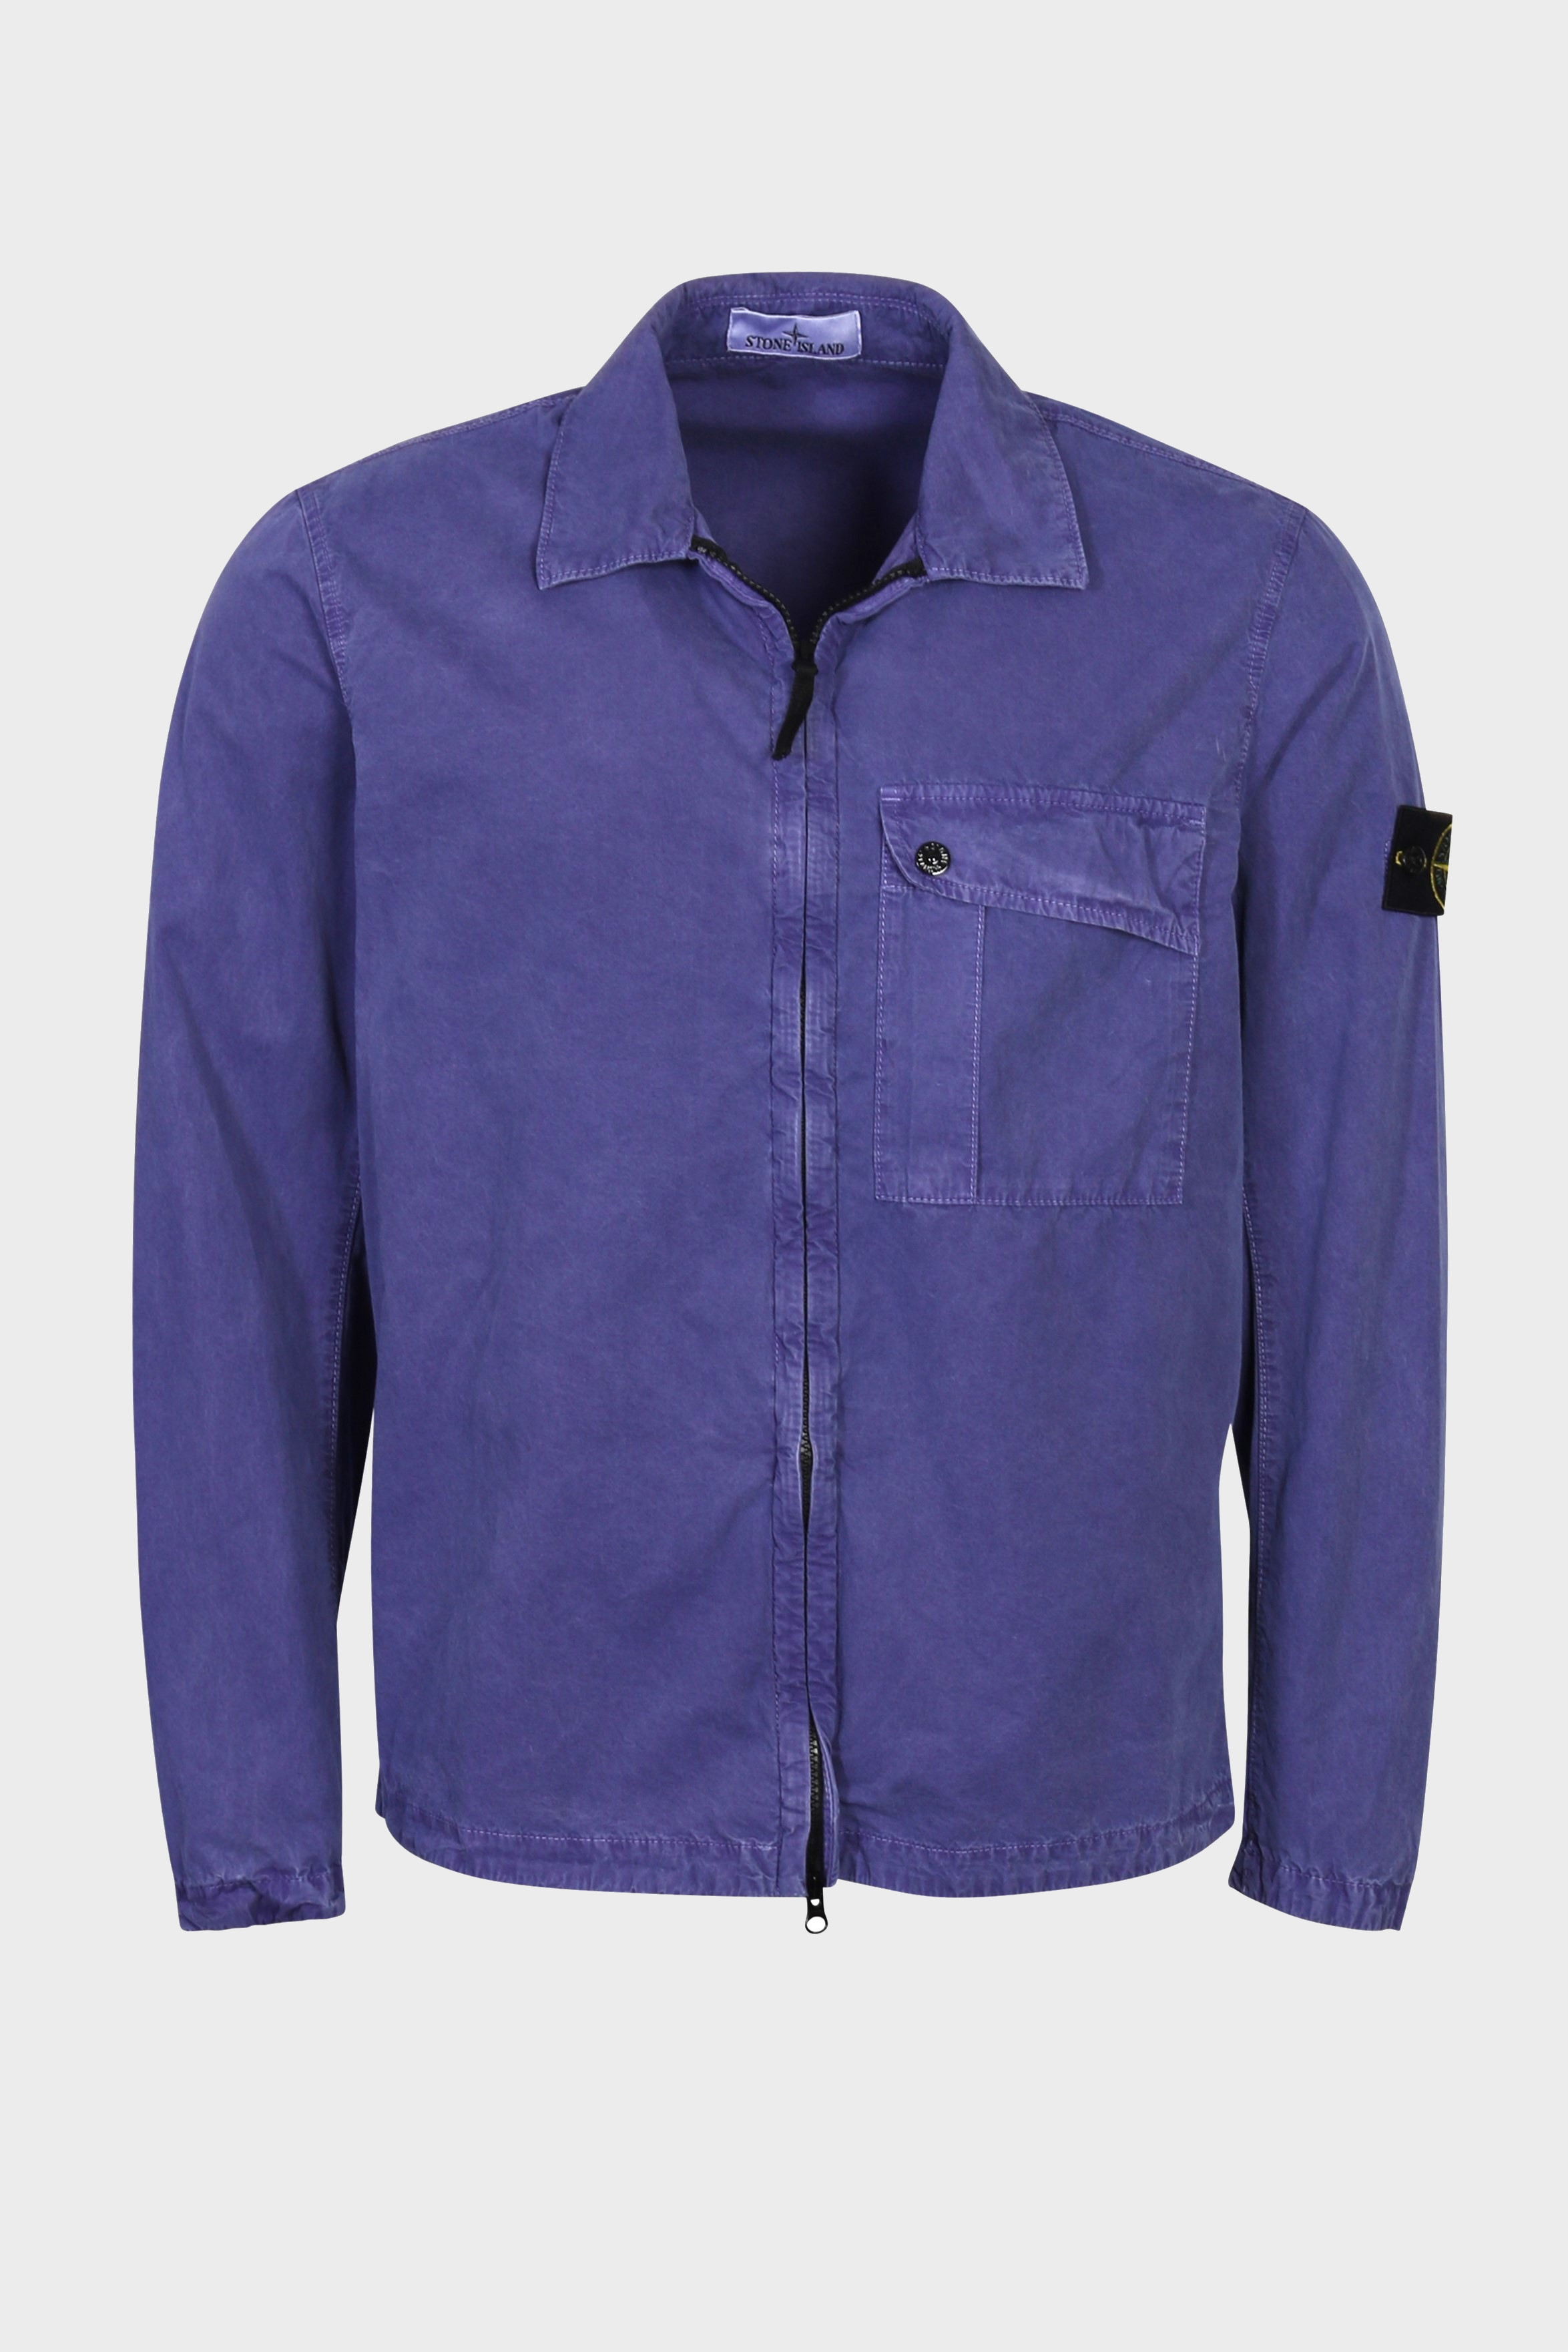 STONE ISLAND Overshirt in Washed Lilac